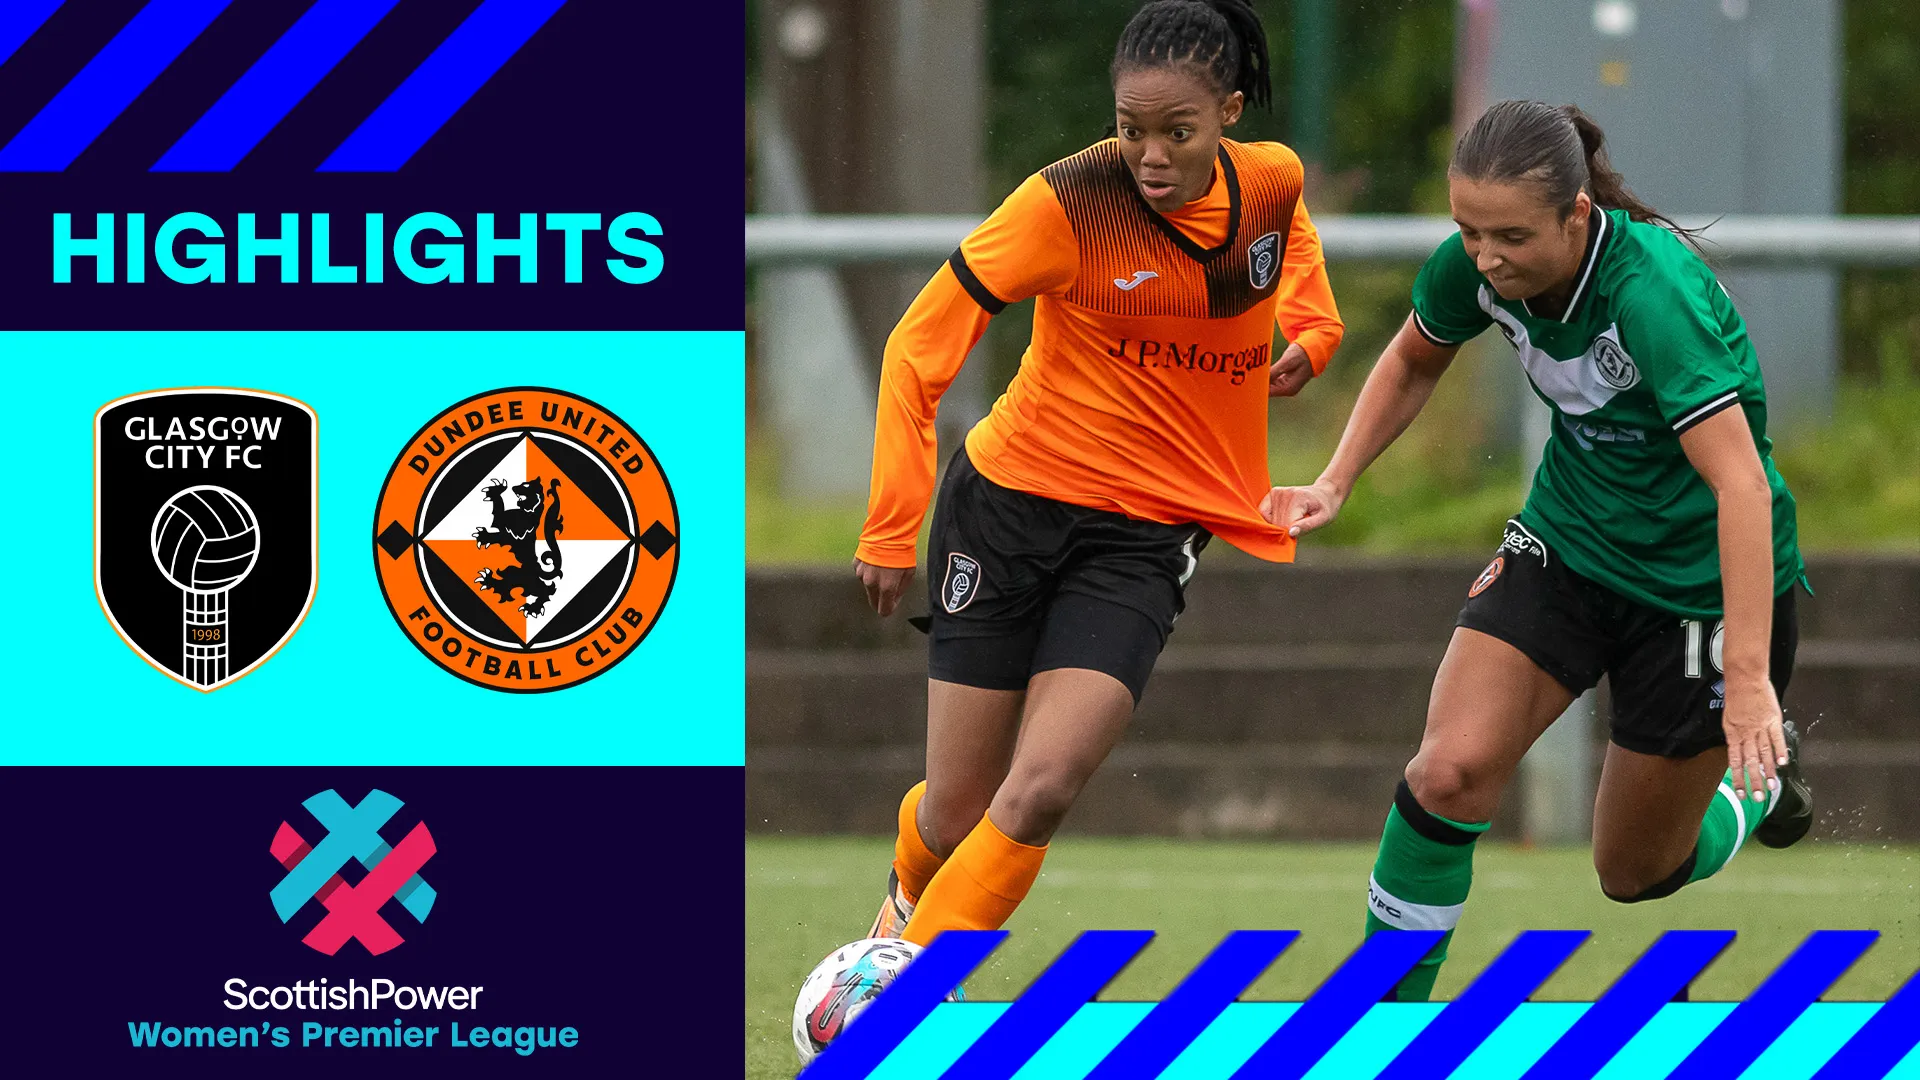 Image for Glasgow City 6-0 Dundee United | Glasgow City remain unbeaten and third in the league | SWPL